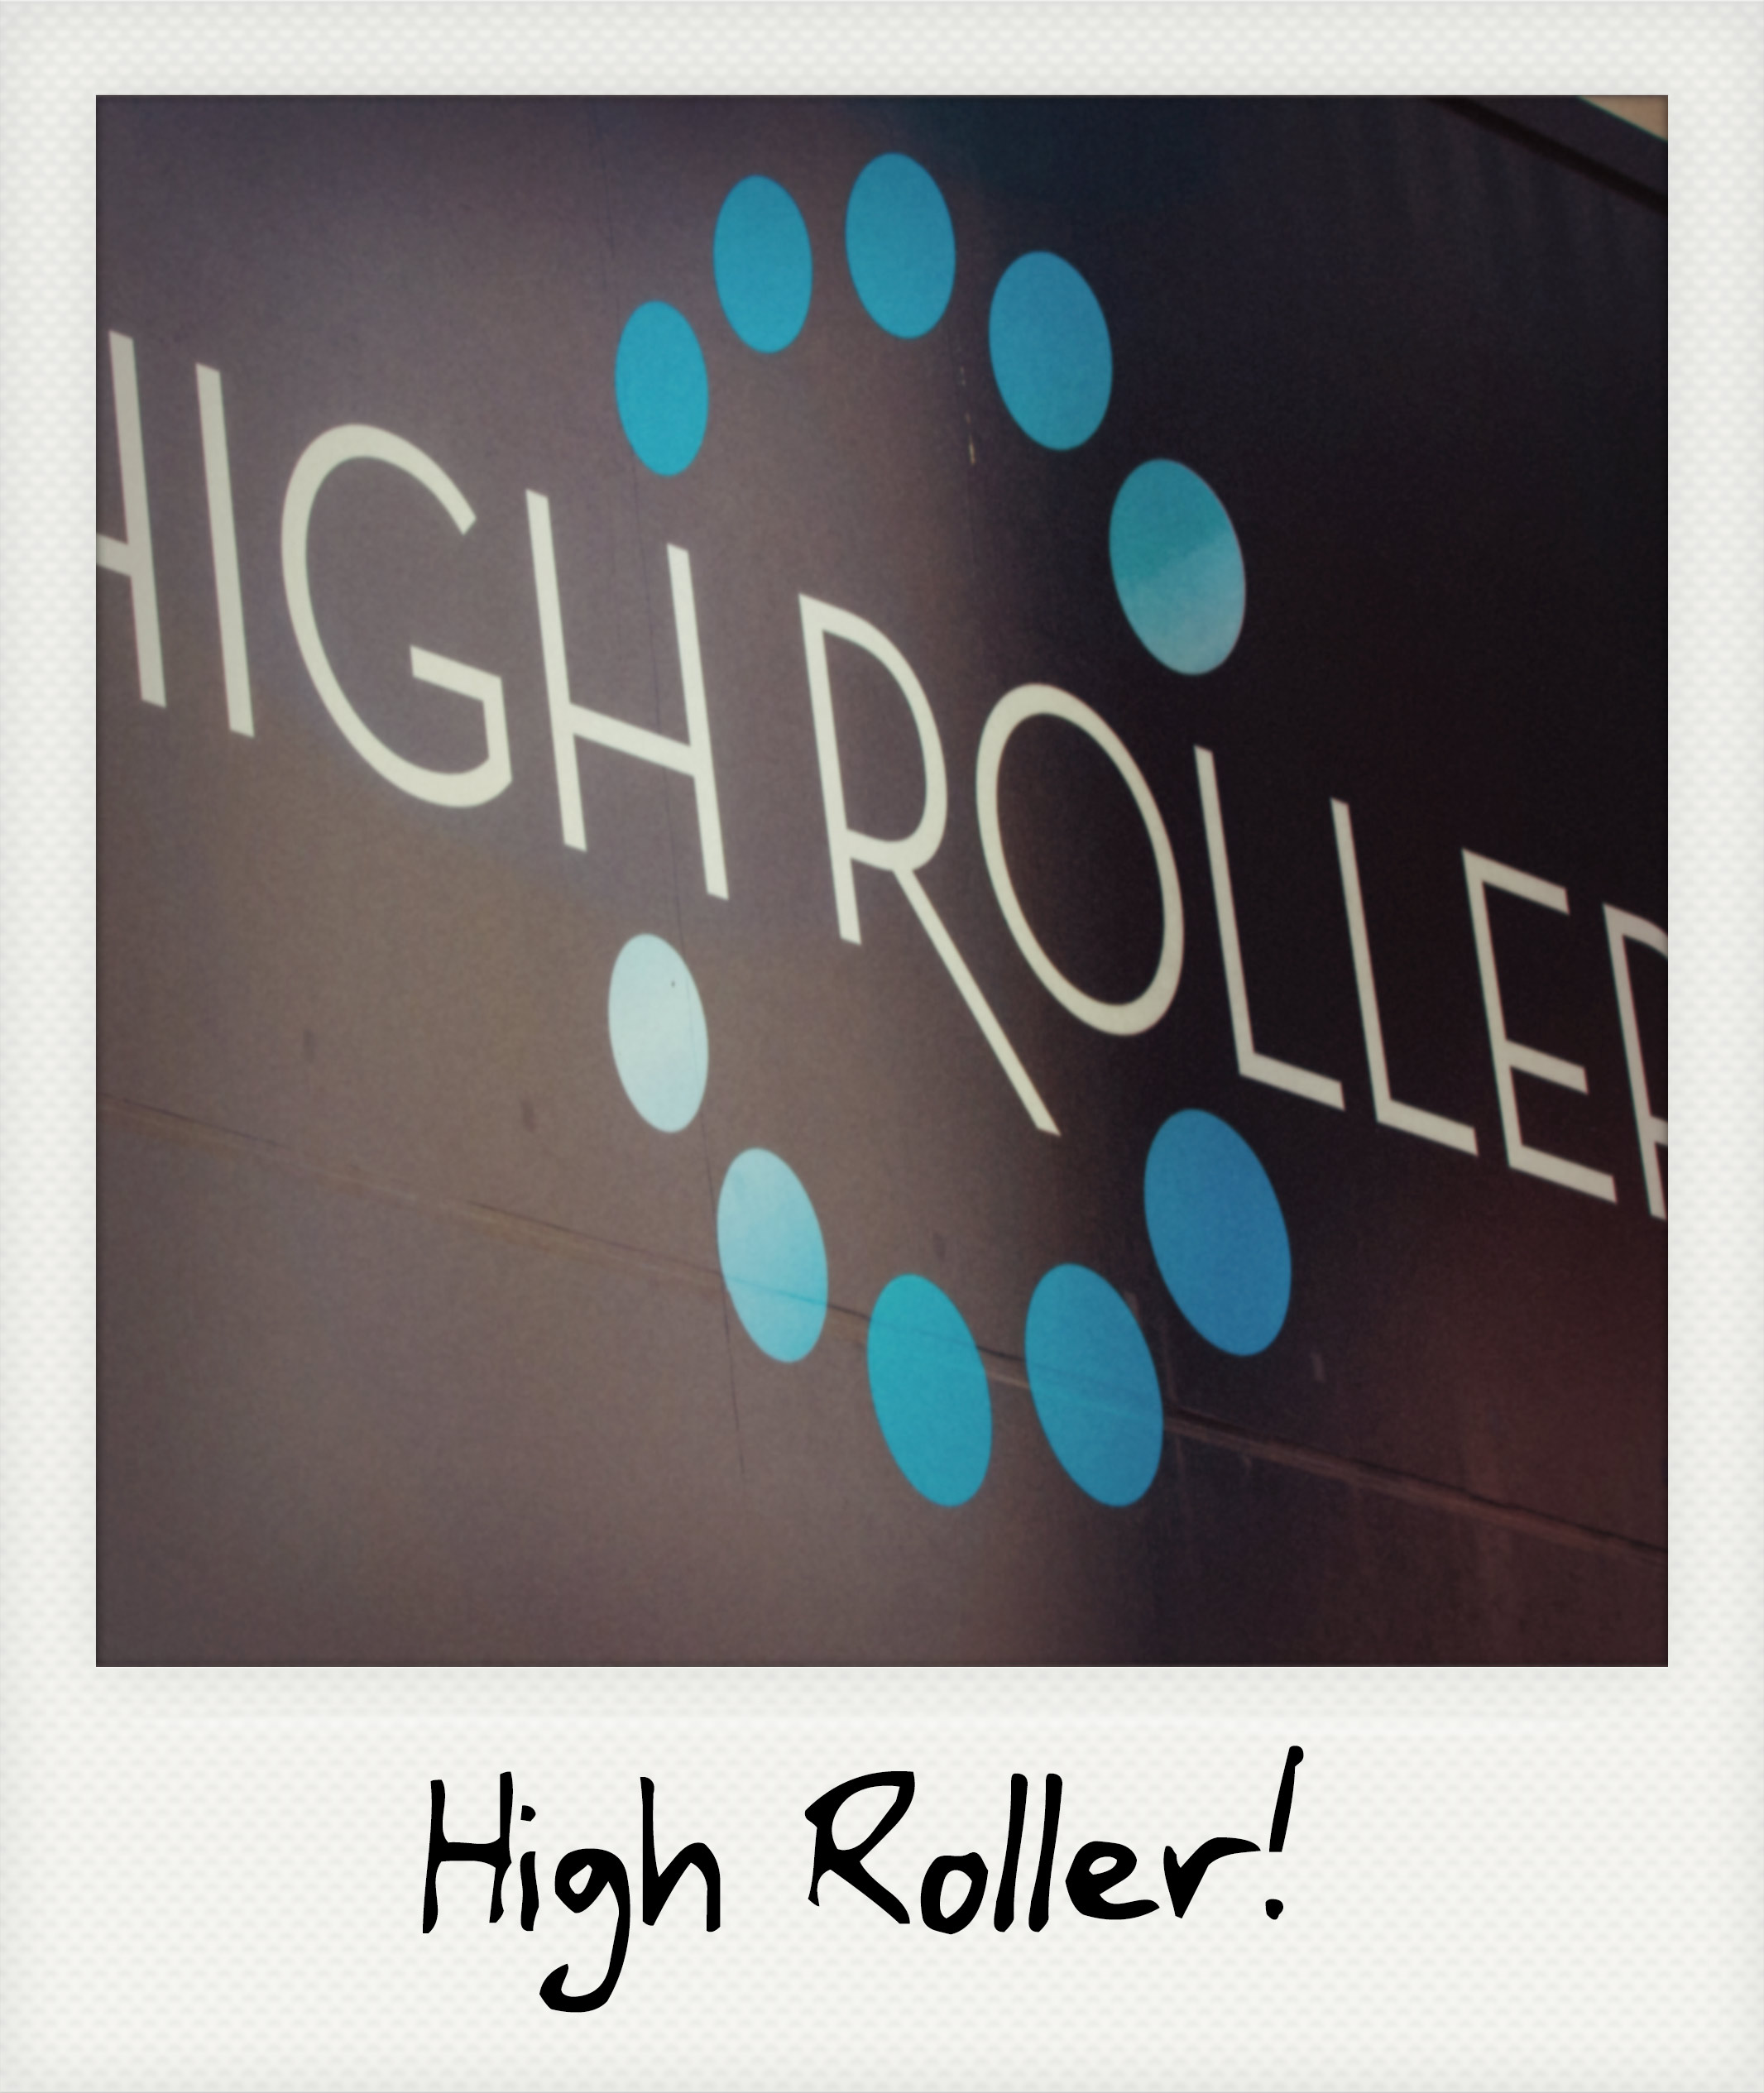 The High Roller!